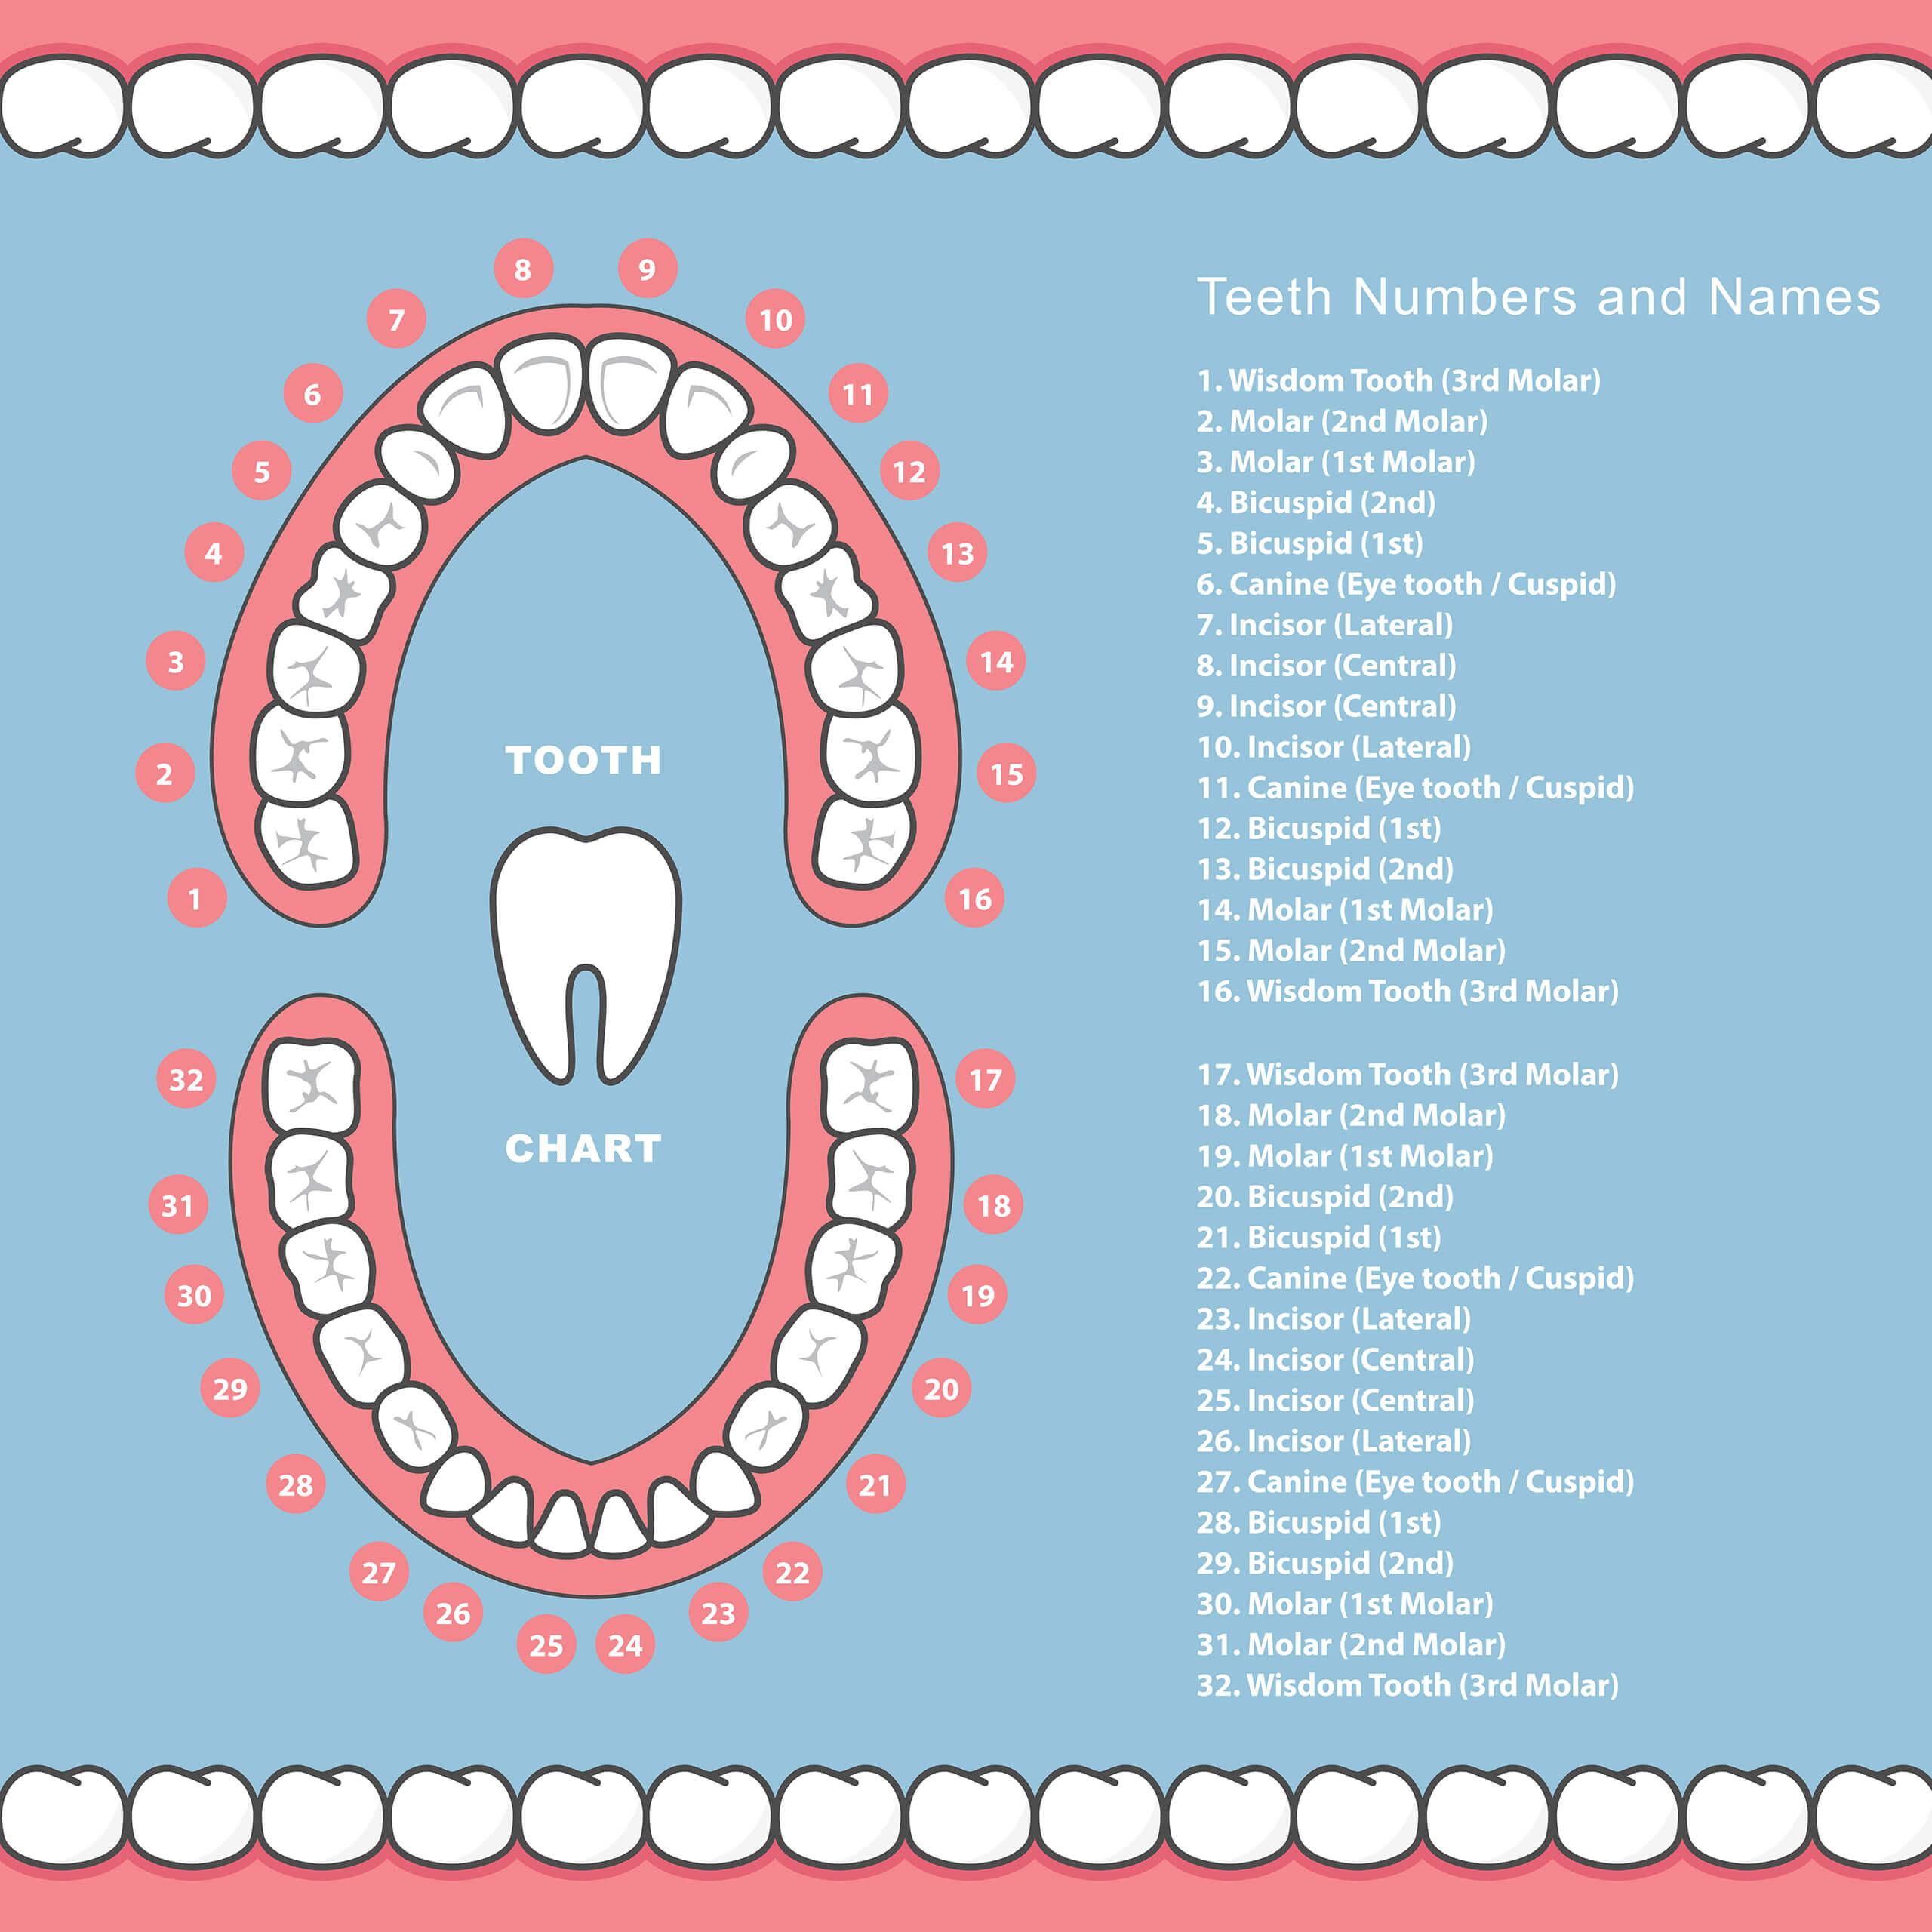 Tooth Number Chart for Adults and Children Grosse Pointe Dentist